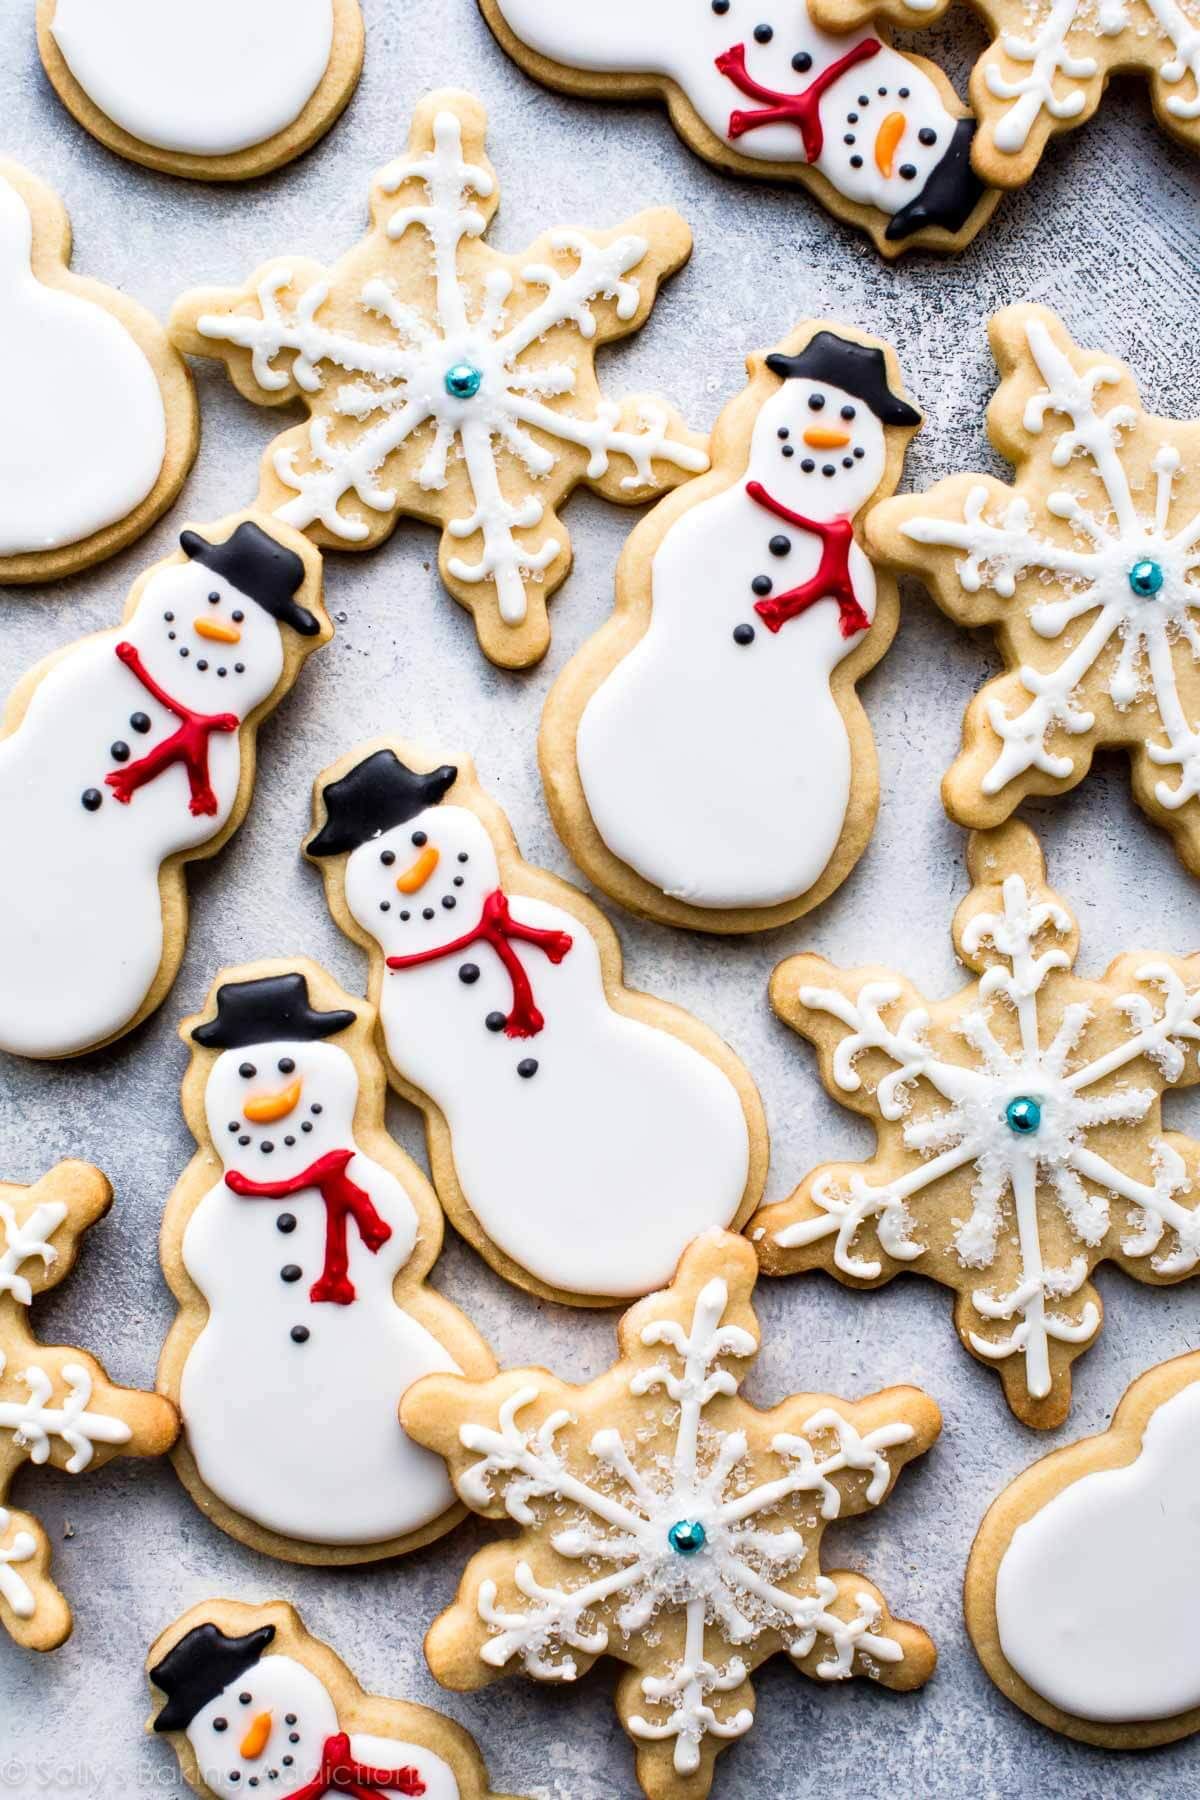 Learn how to make adorable snowman and snowflake sugar cookies with ...